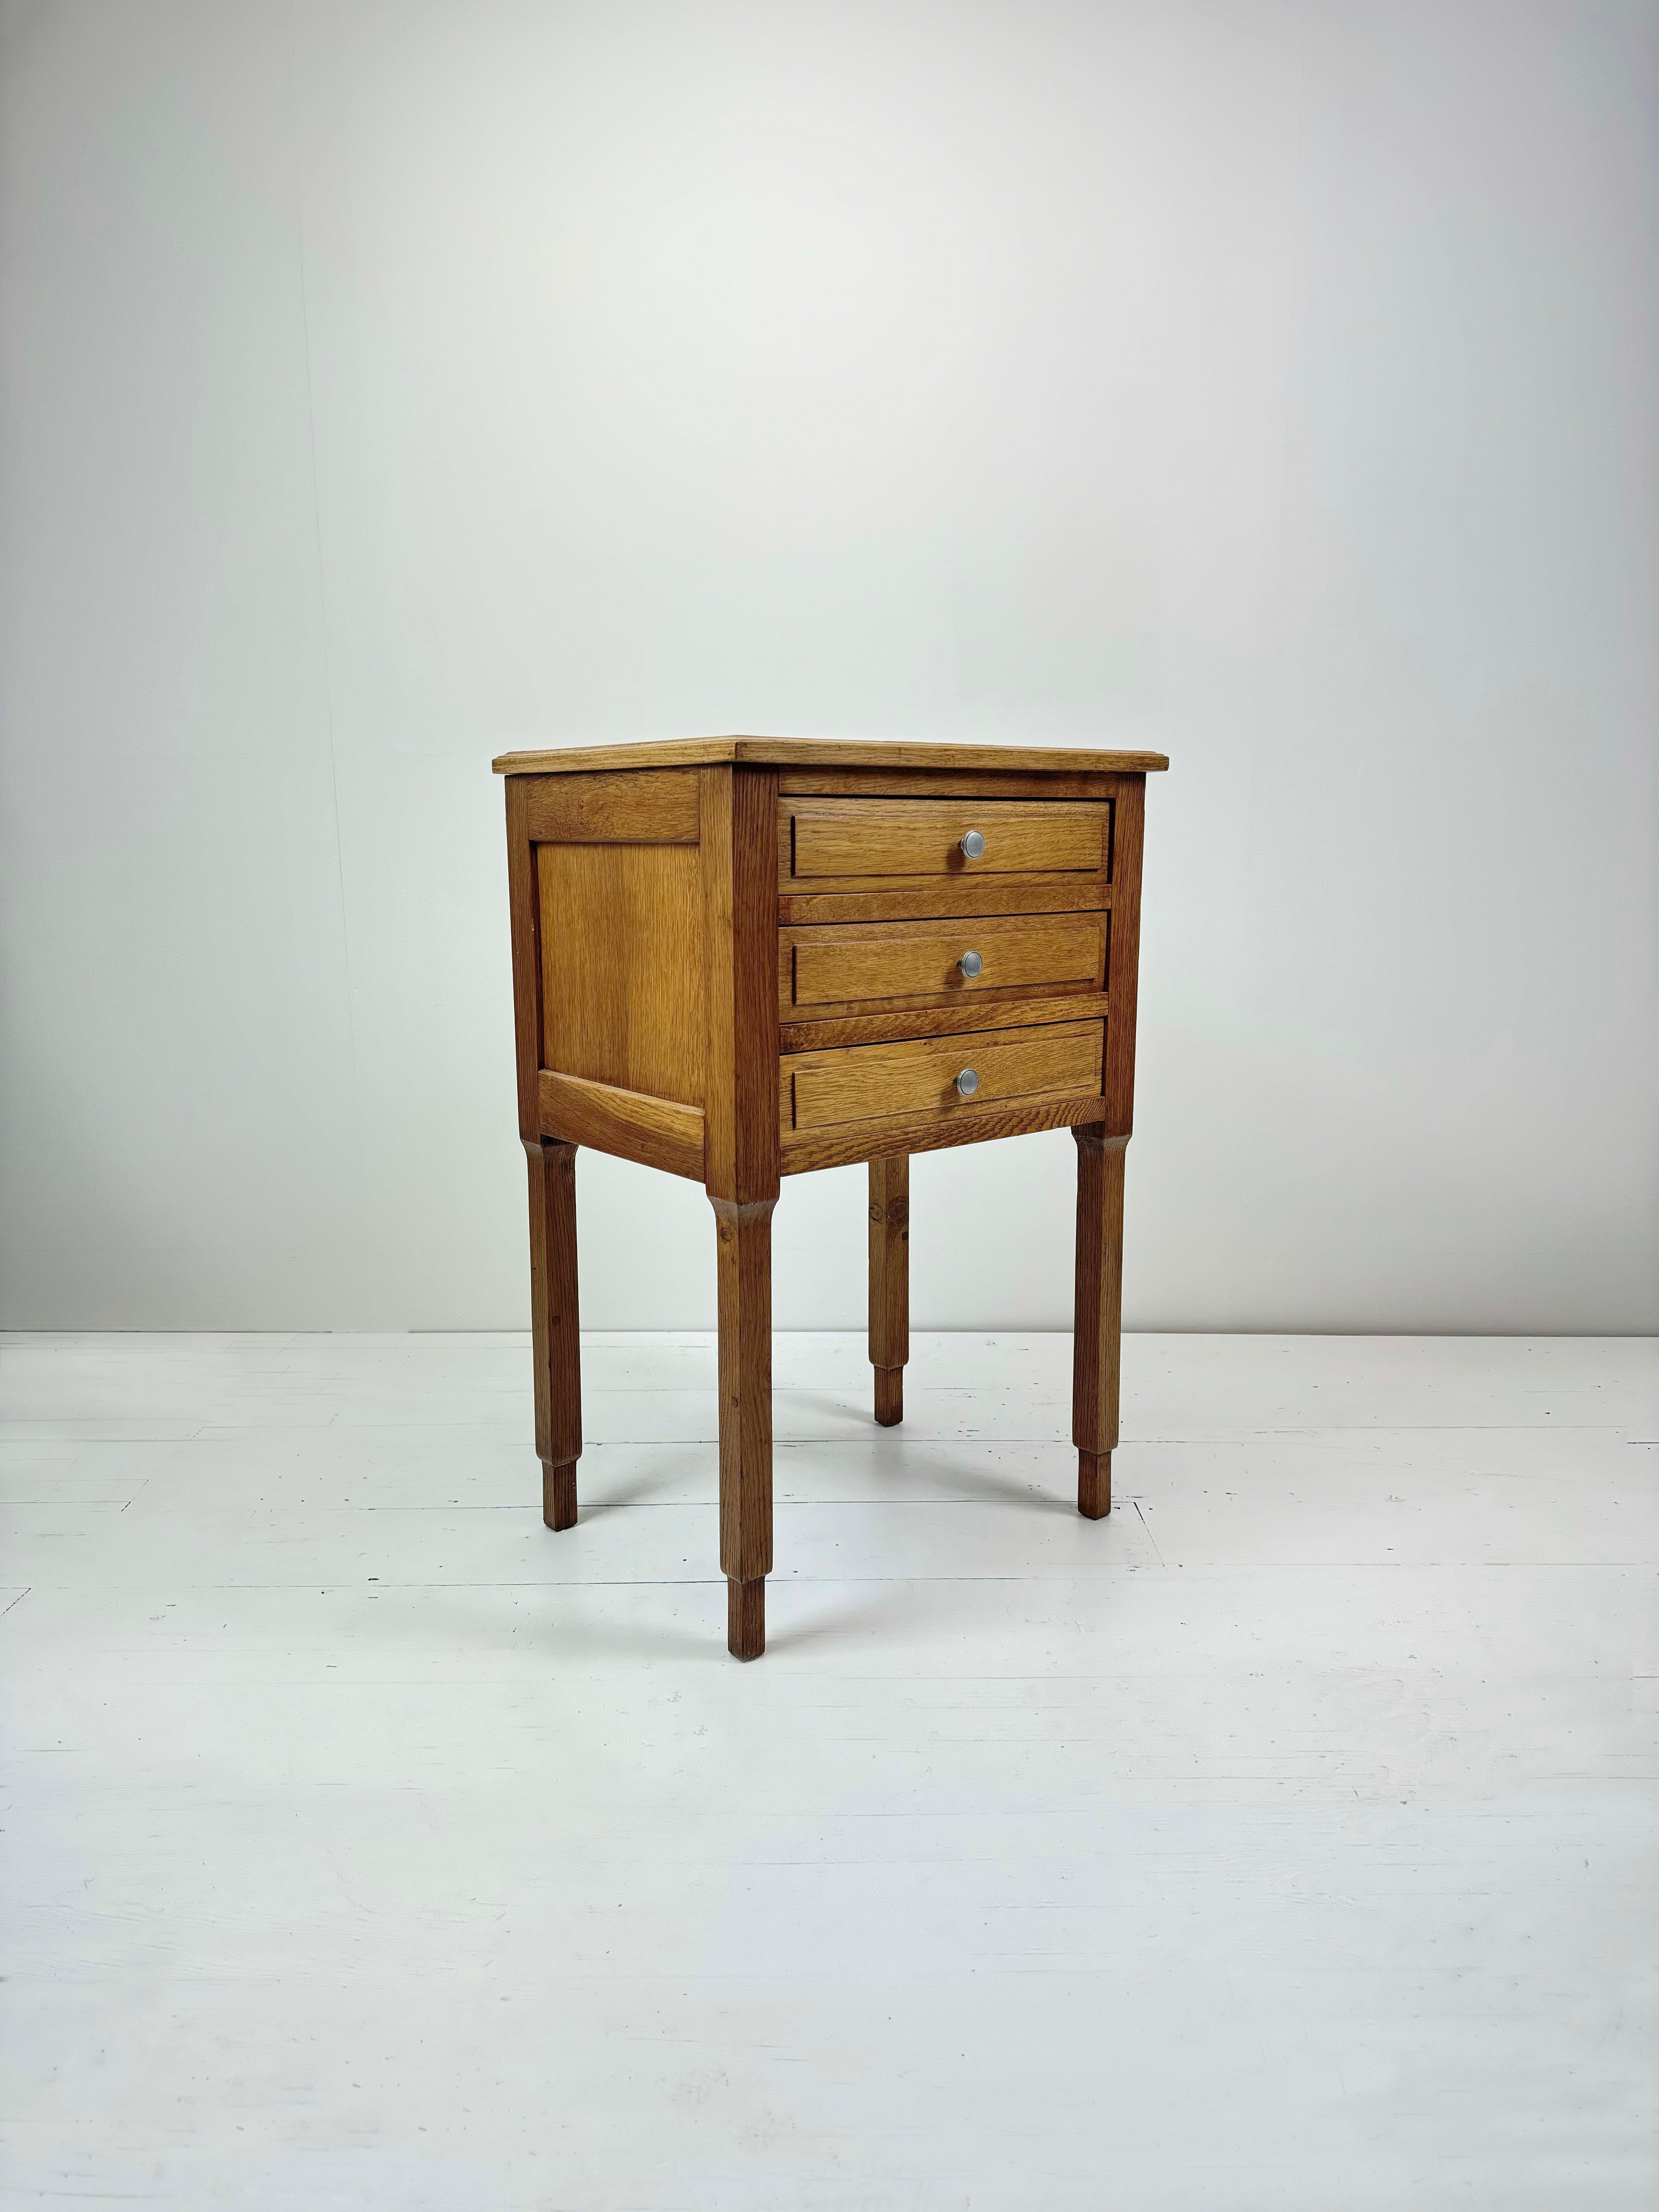 Add a touch of old-world elegance to your bedroom with this exquisite Art Deco, French Oak Parquetry Top, Night Stand, dating back to the 1930's France. The stunning parquetry top showcase the finest craftsmanship of the erain France for Parquetry